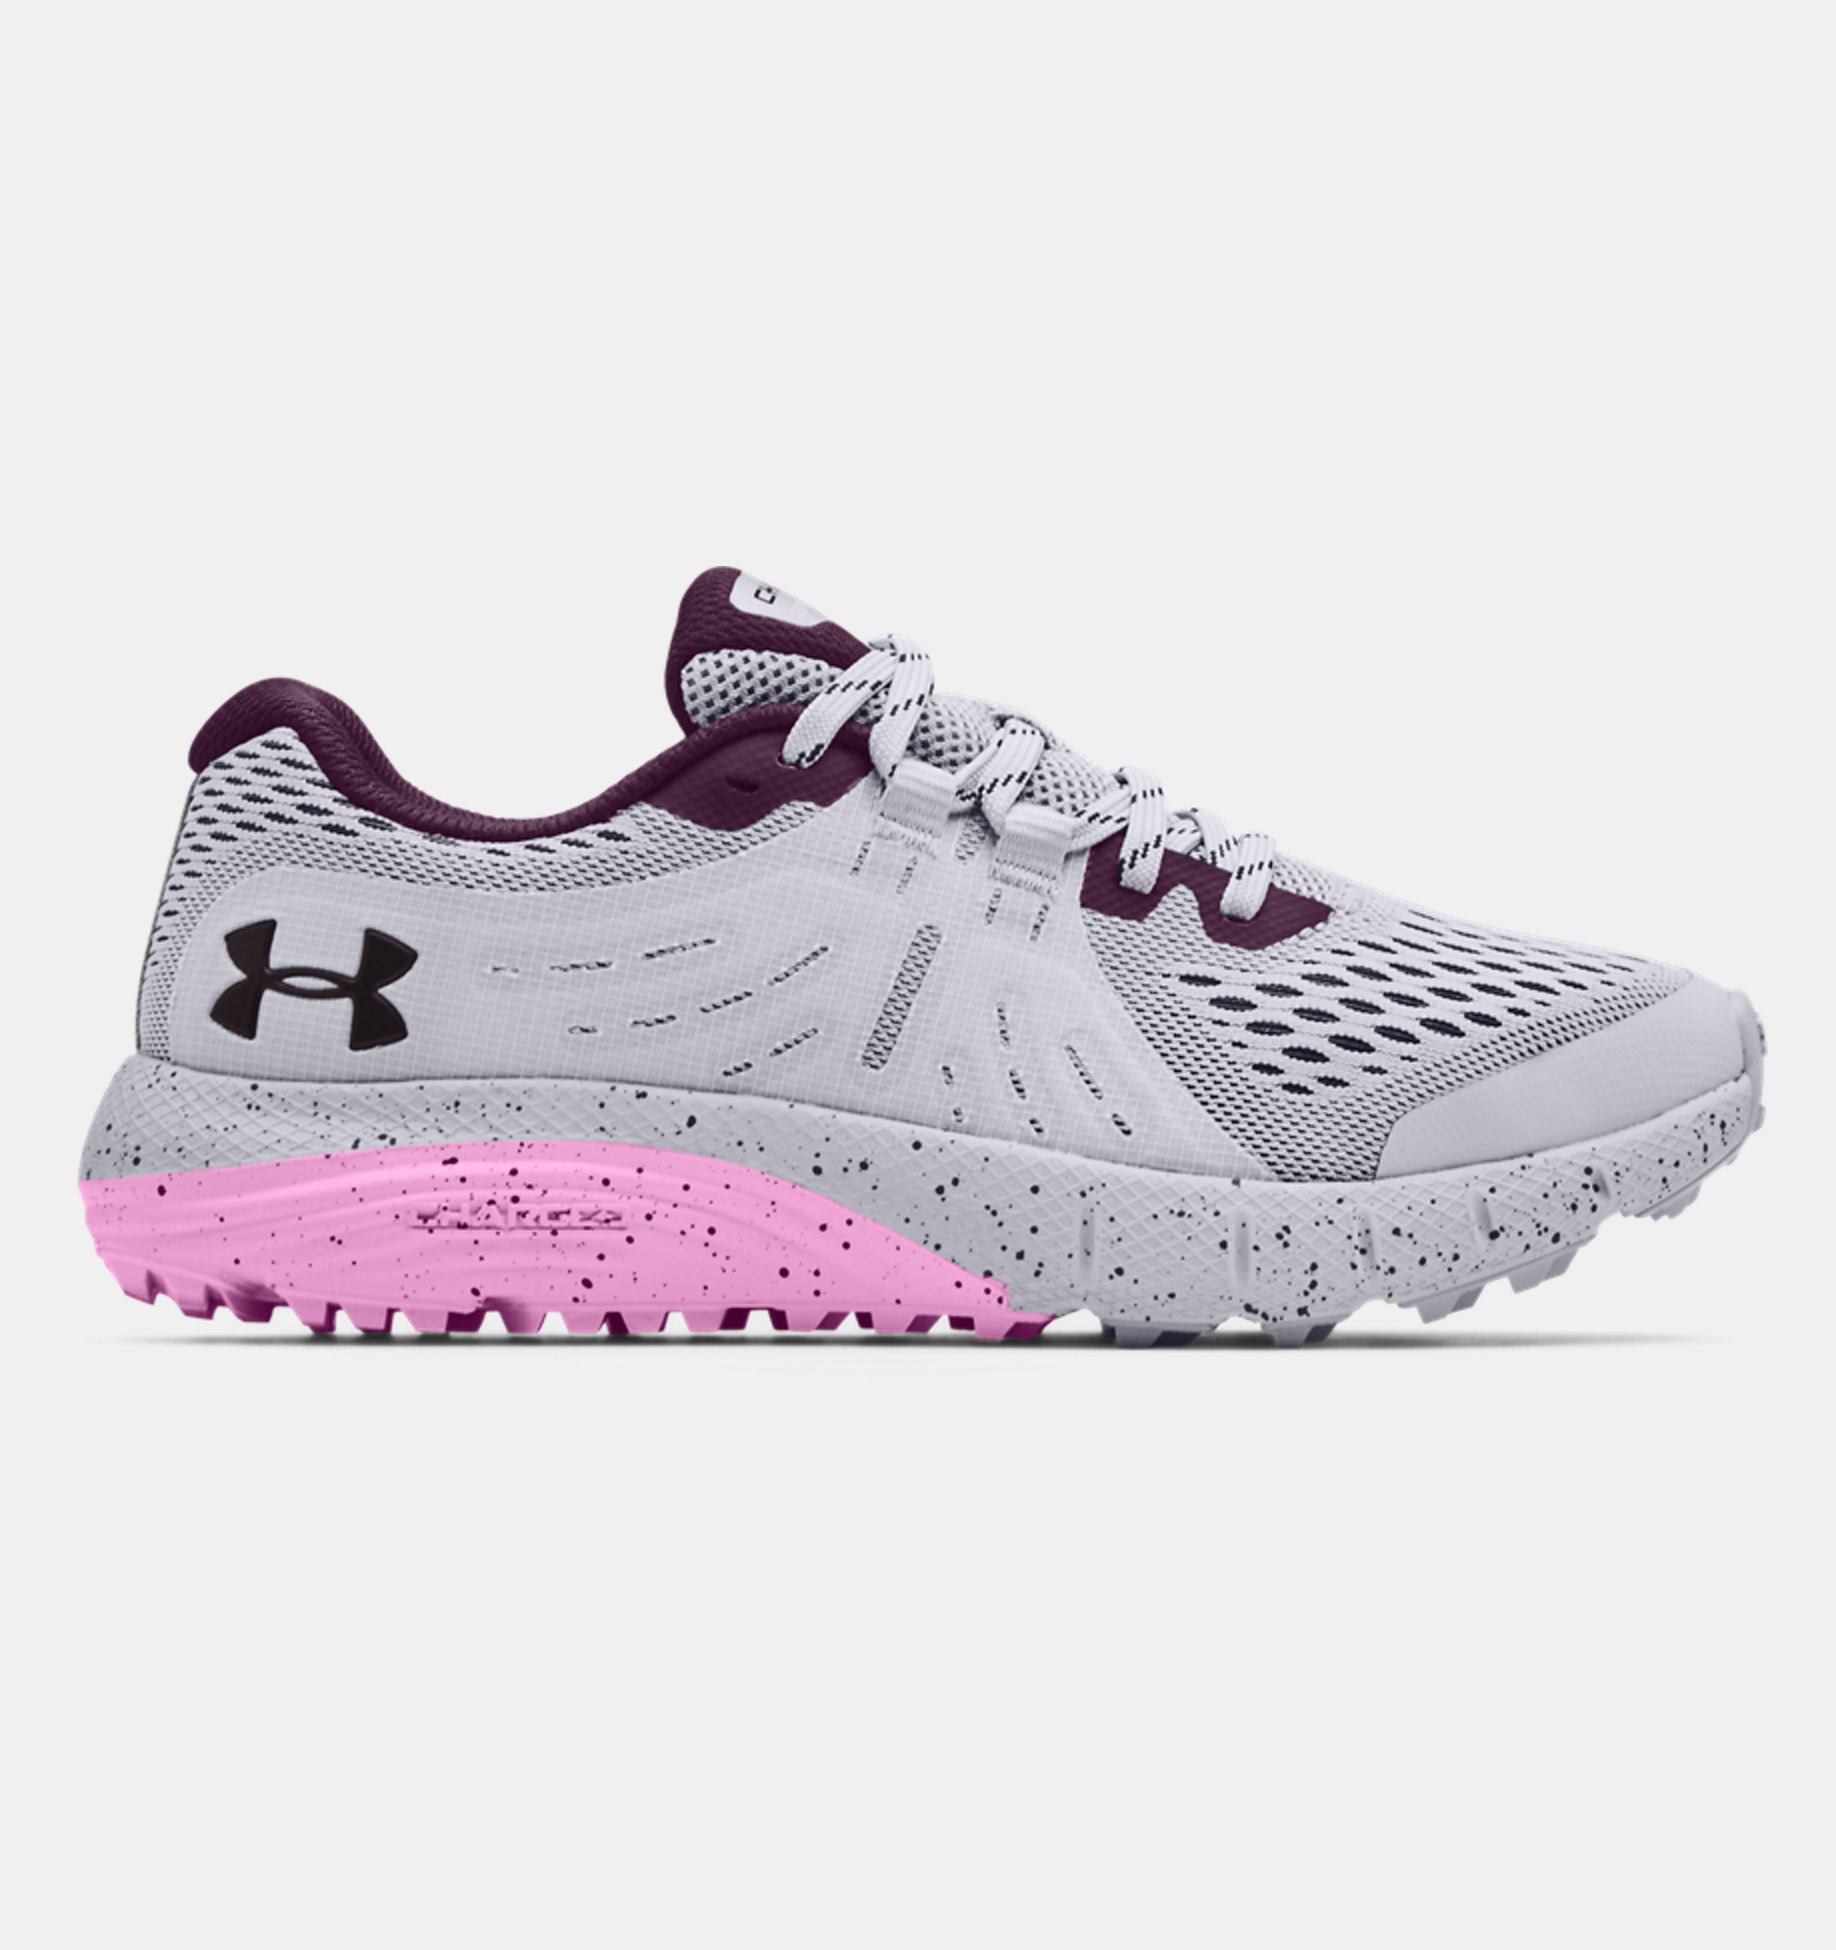 Under Armour Women's Charged Bandit Trail Gore-tex Sneaker 